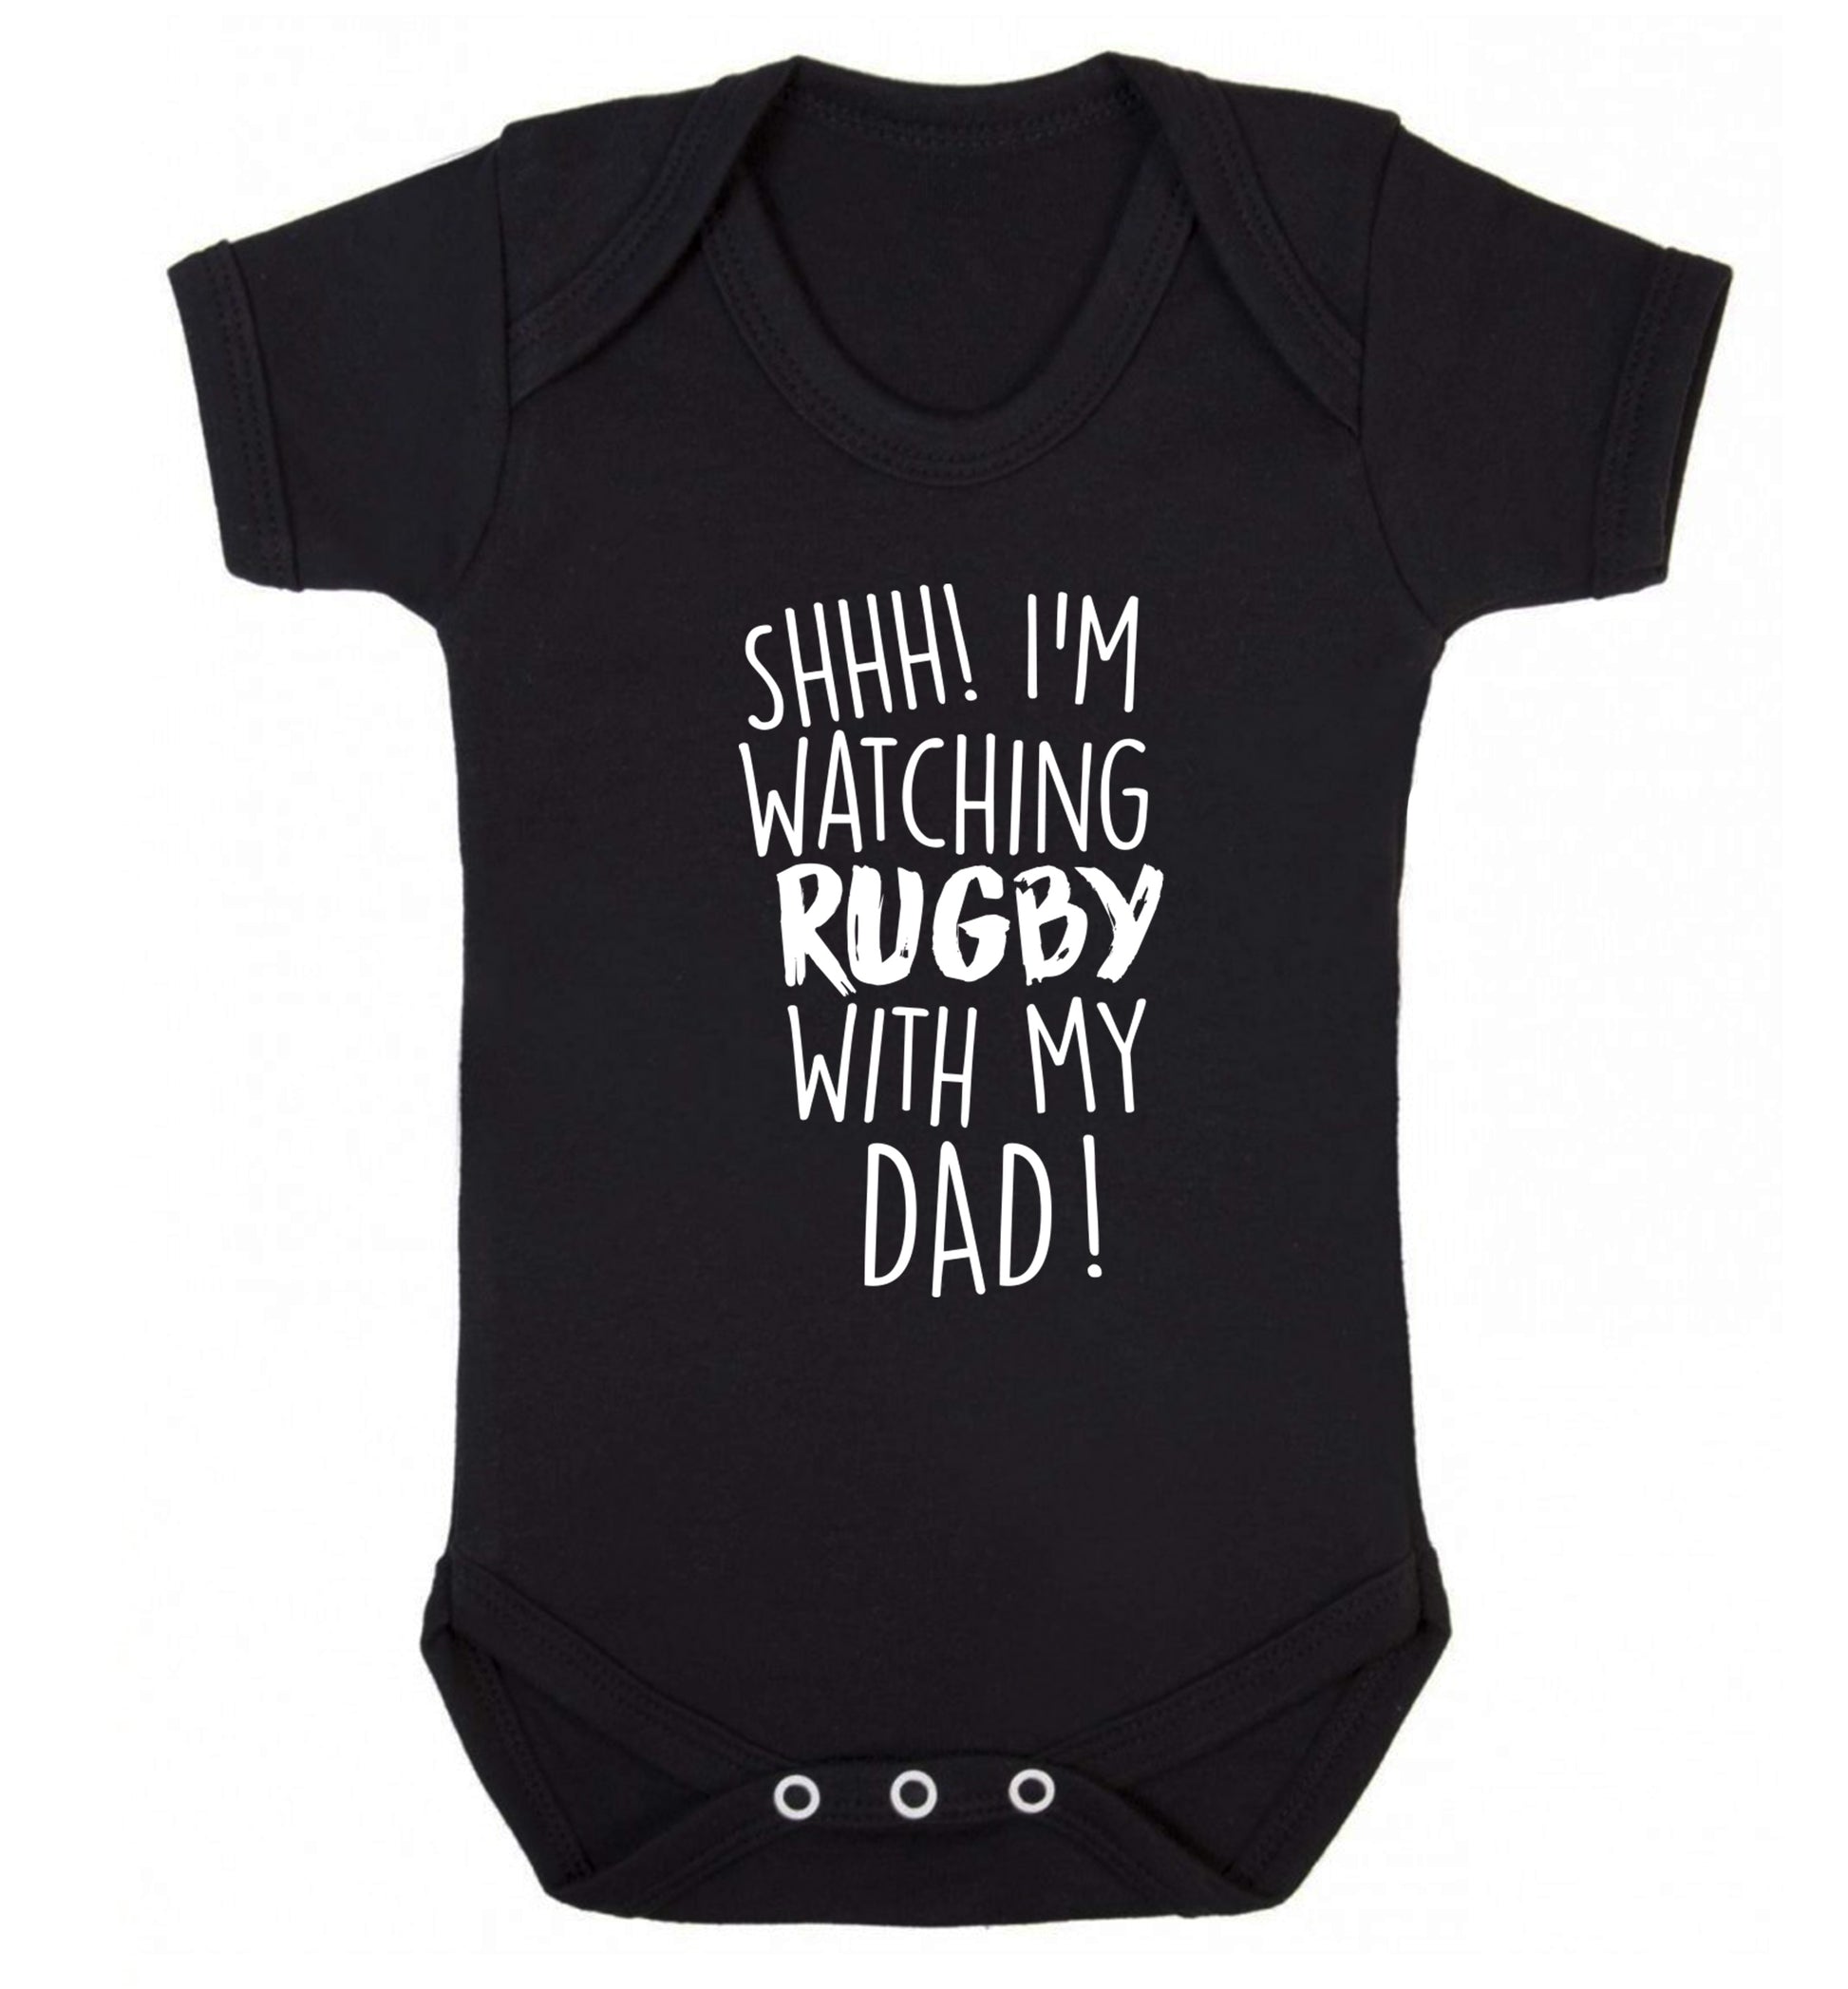 Shh... I'm watching rugby with my dad Baby Vest black 18-24 months